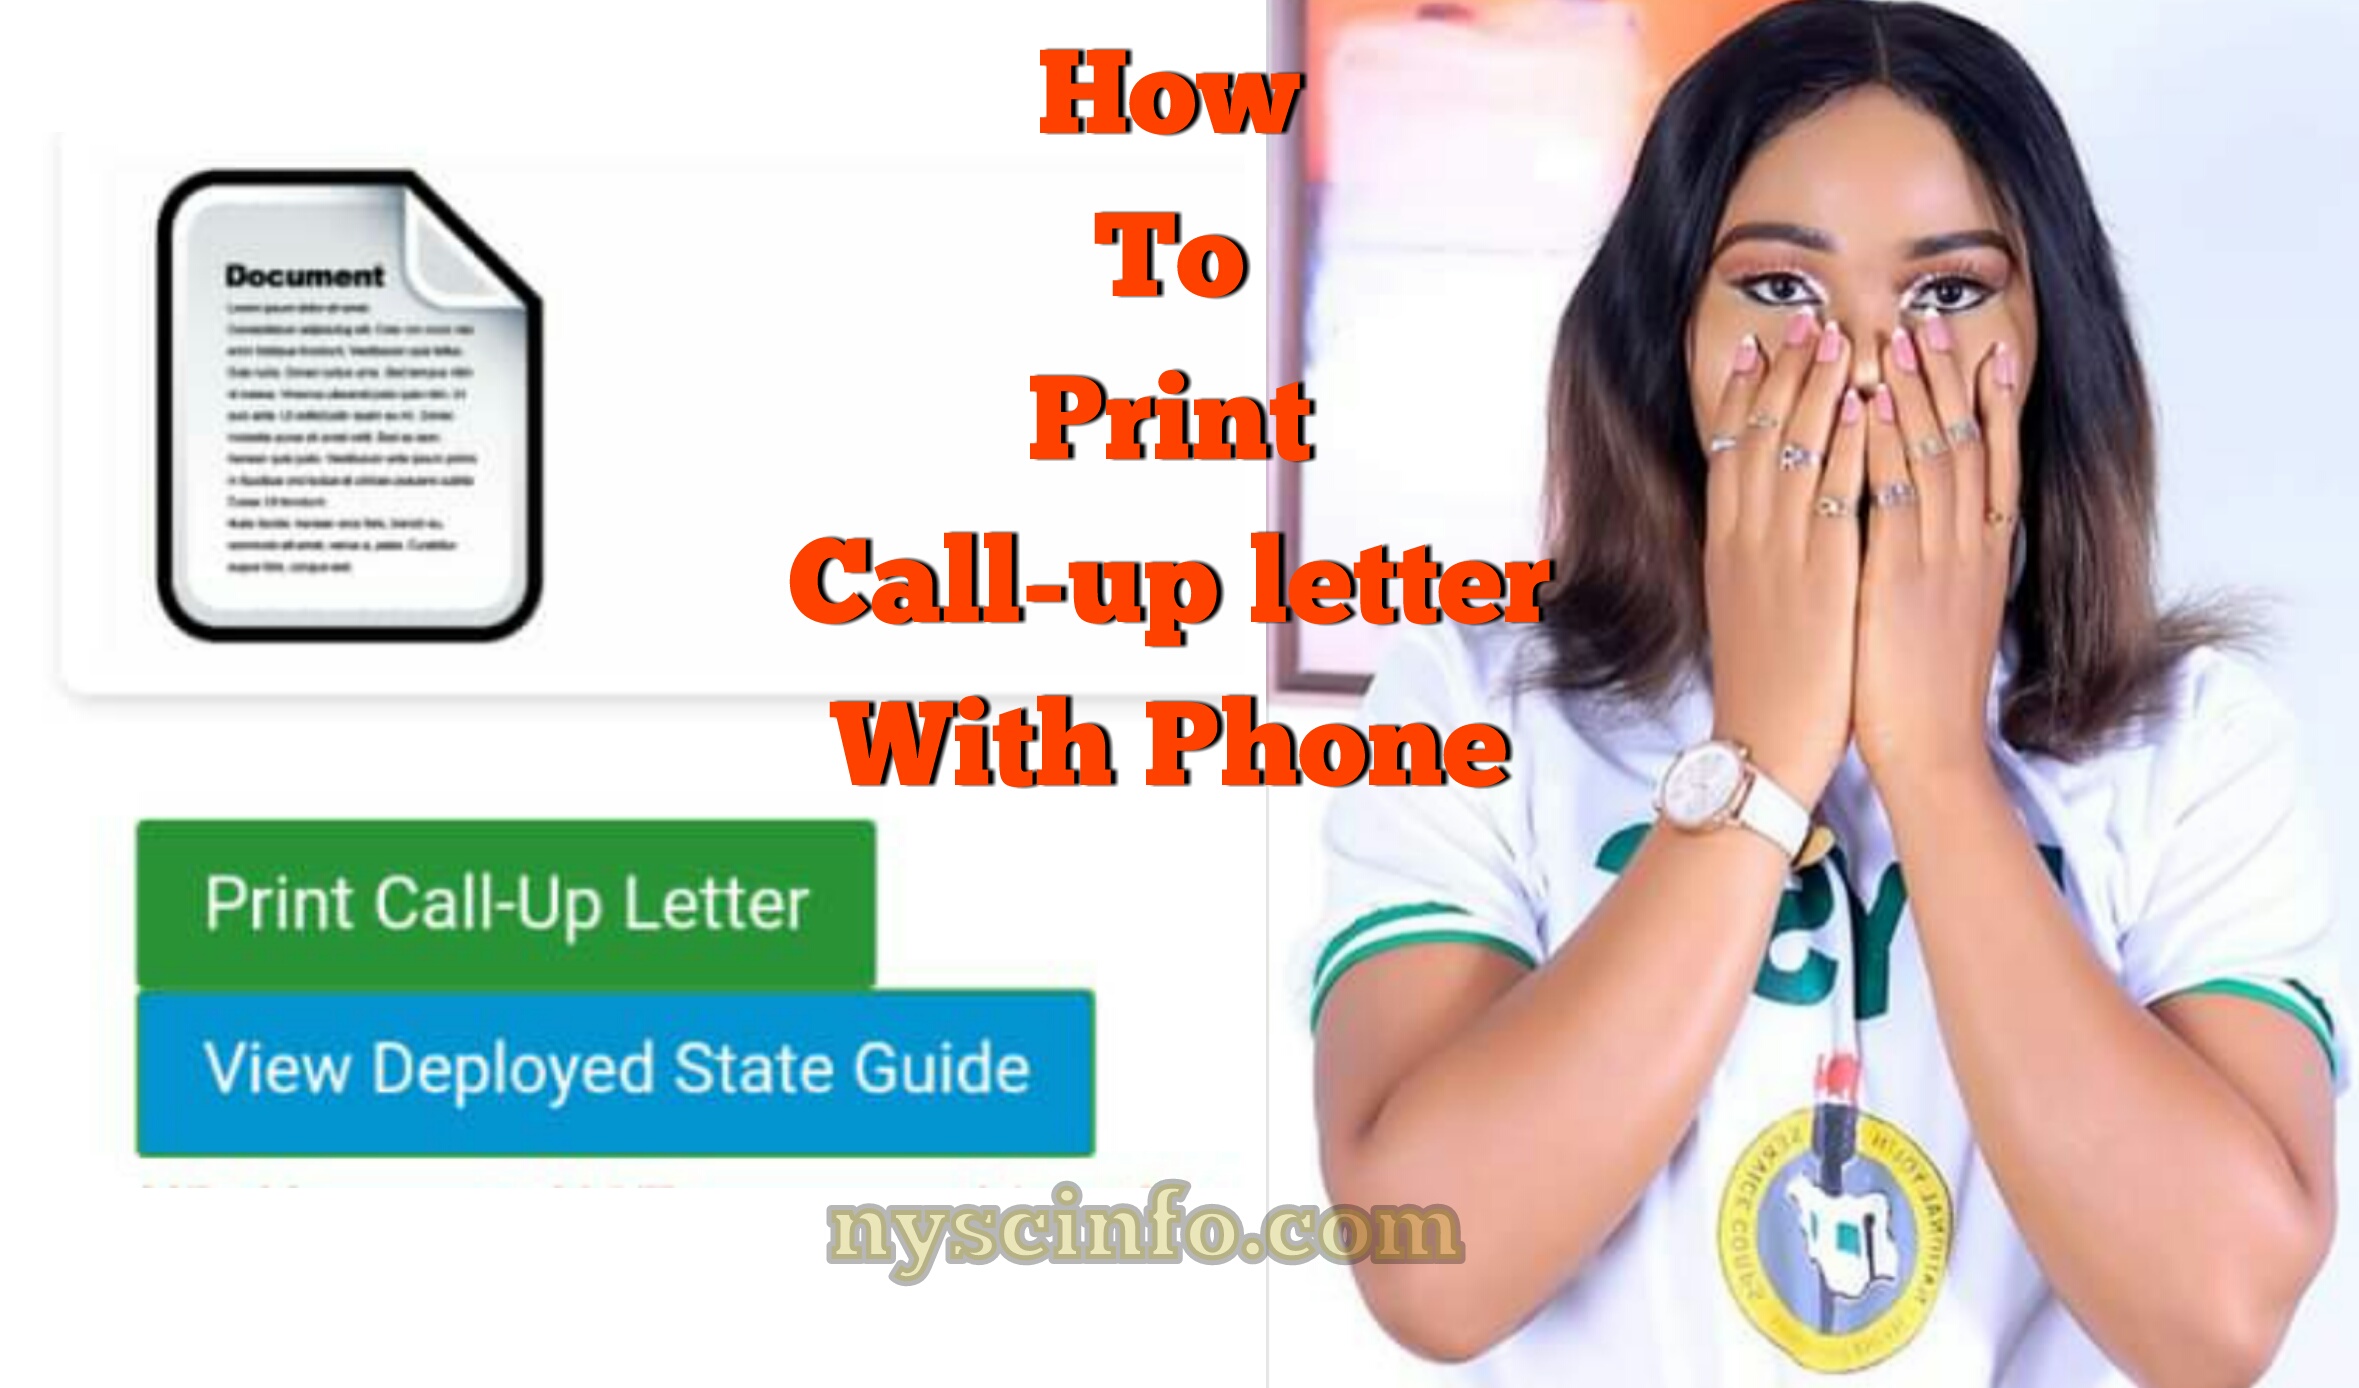 How to print nysc call-ip letter